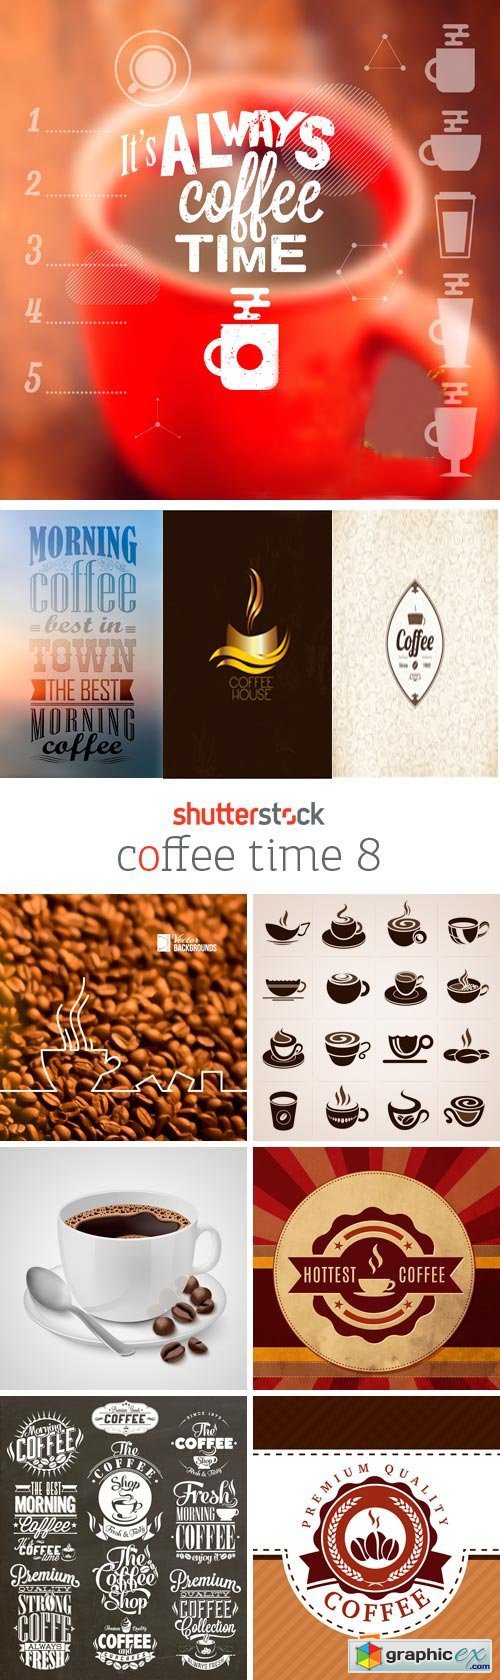 Amazing SS - Coffee Time 8, 25xEPS